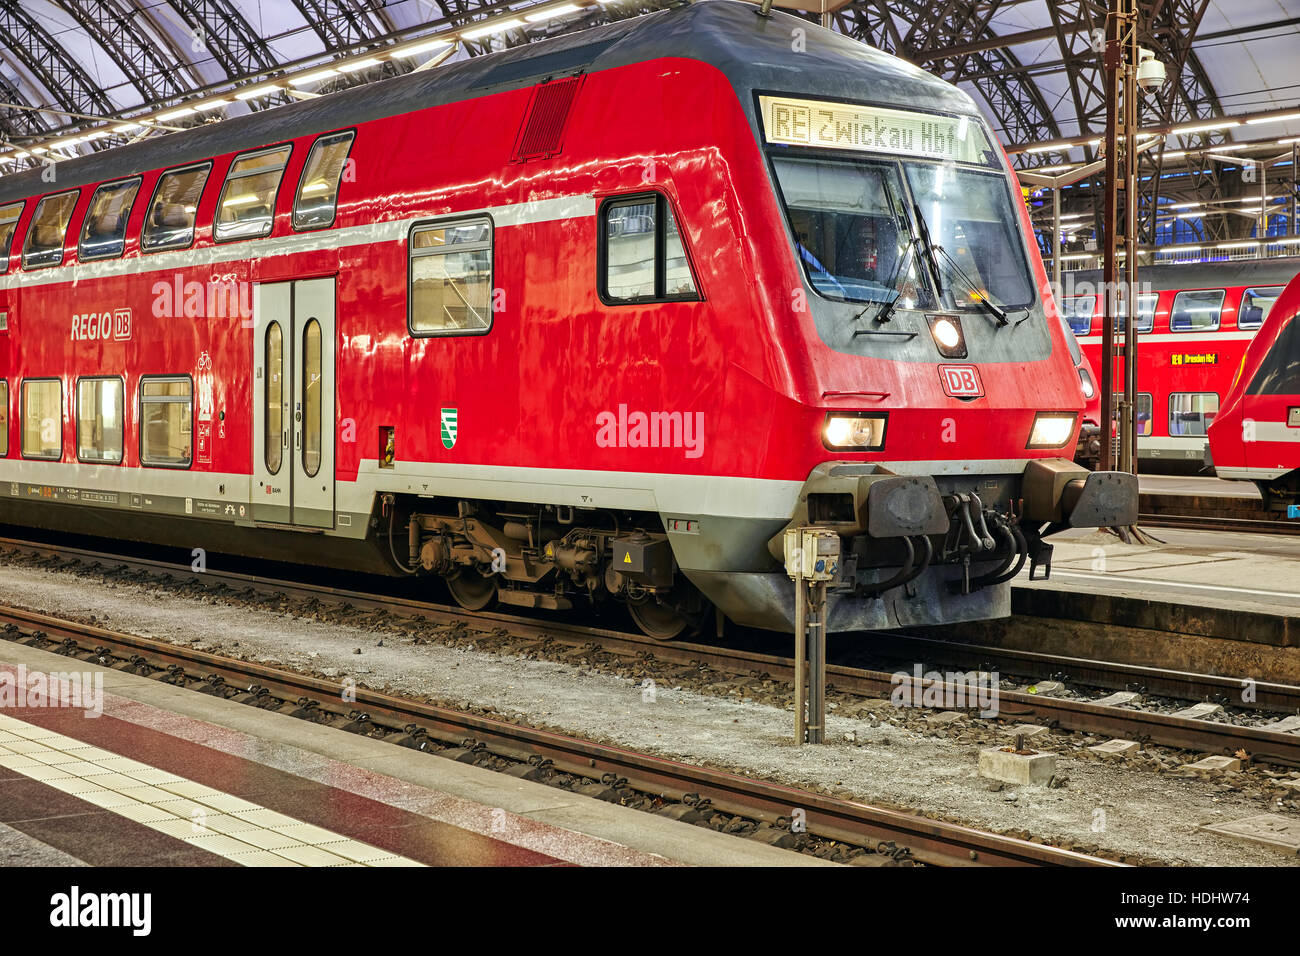 DRESDEN,GERMANY-SEPTEMBER 08,2015: Intercity train at the railways station of Dresden.Rail transport in Germany is at a very high level of progress. S Stock Photo